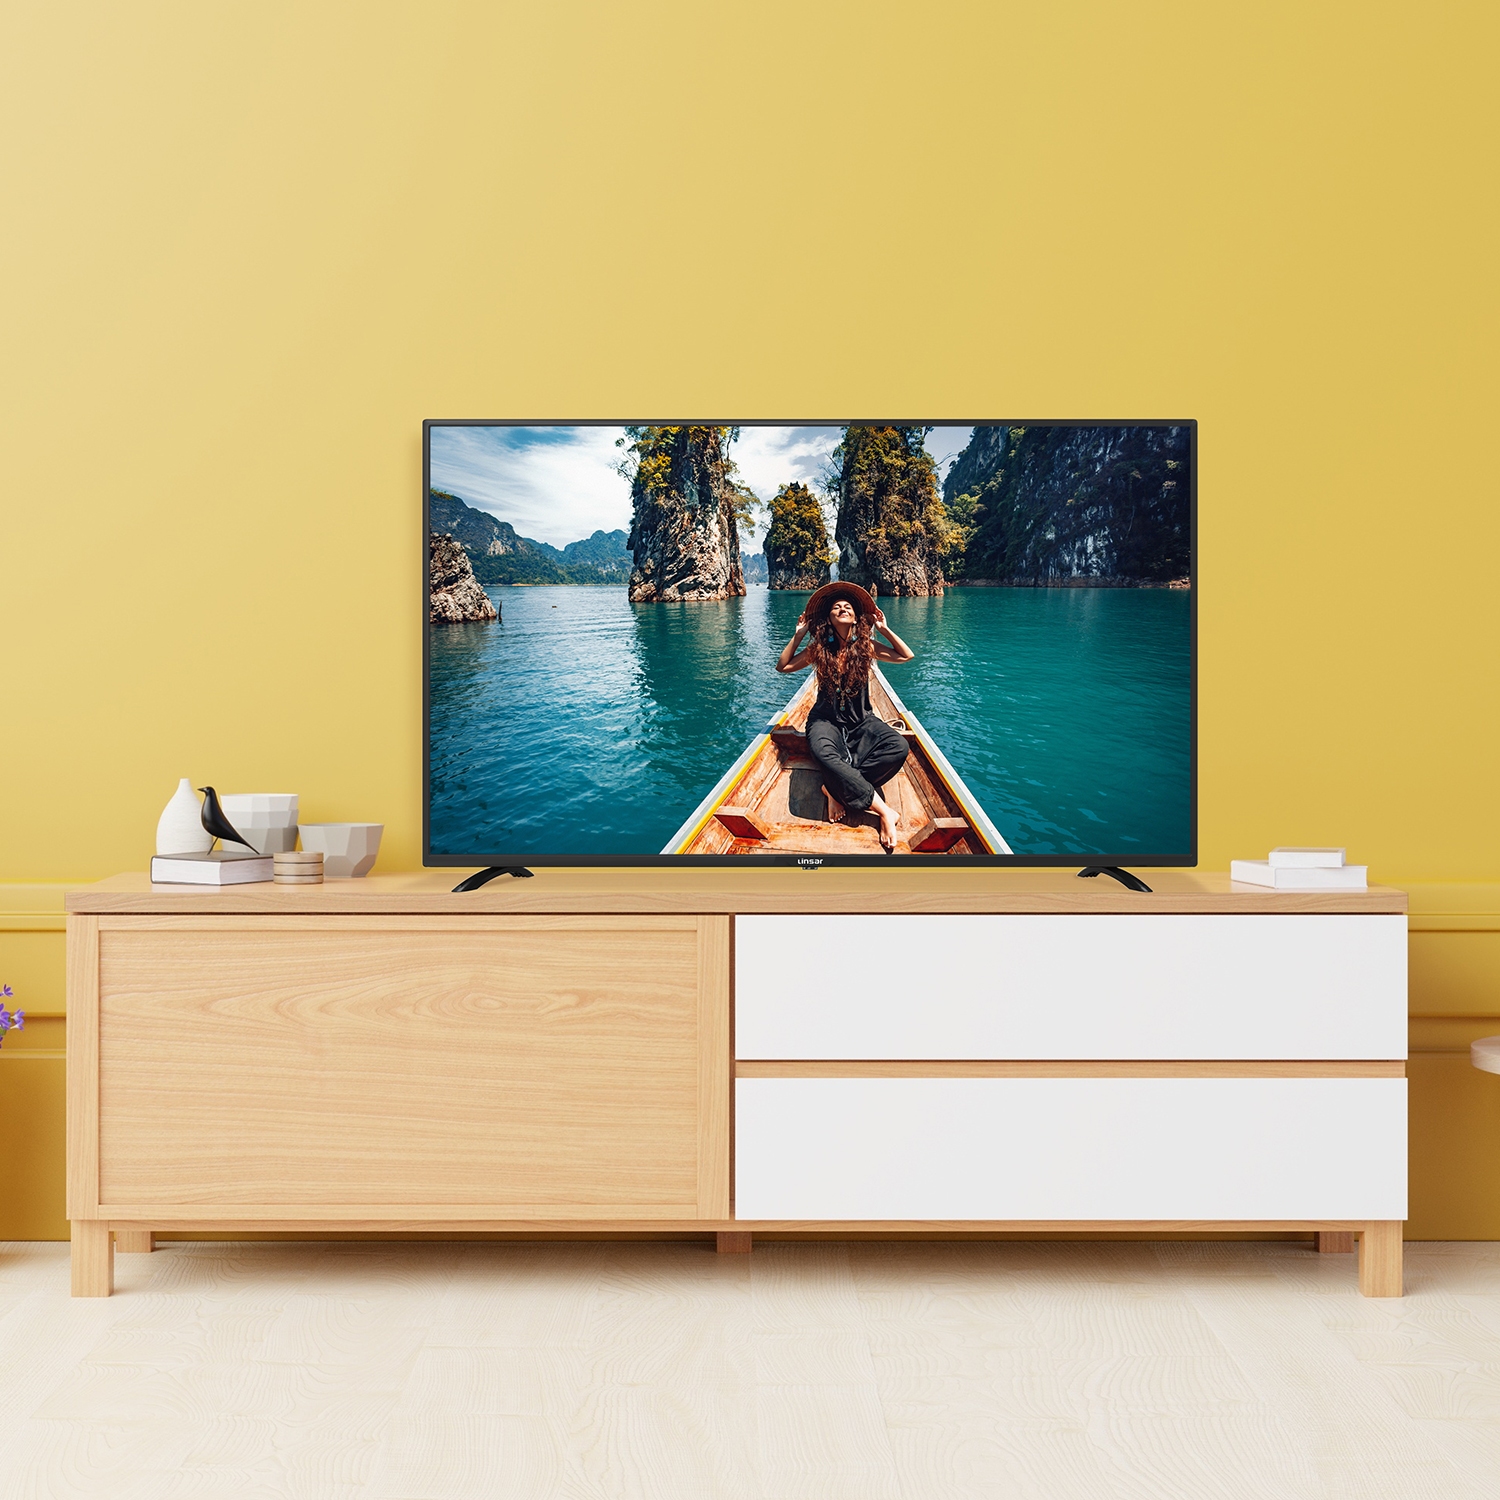 Linsar GT43LUXE 43" Full HD TV - Freeview Play and USB Record/Playback - 2